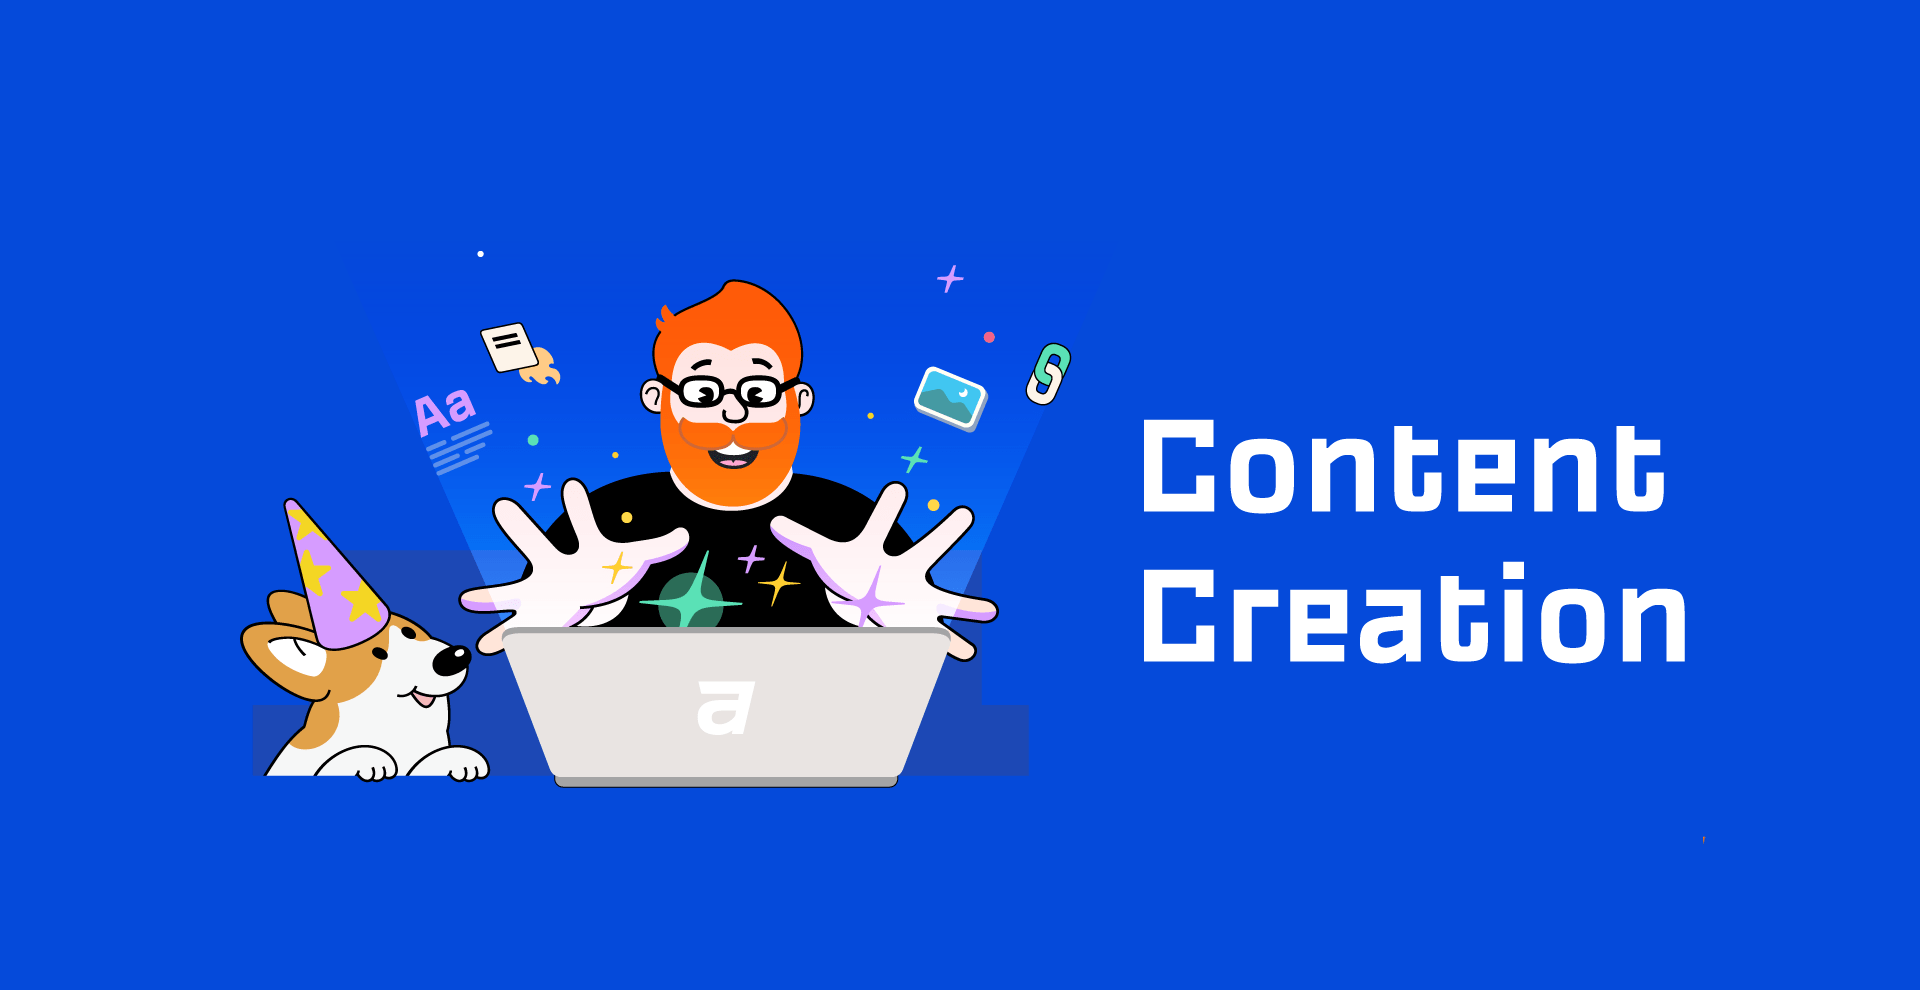 Content Creation, Marketing & promotion complete course from beginner to advance.